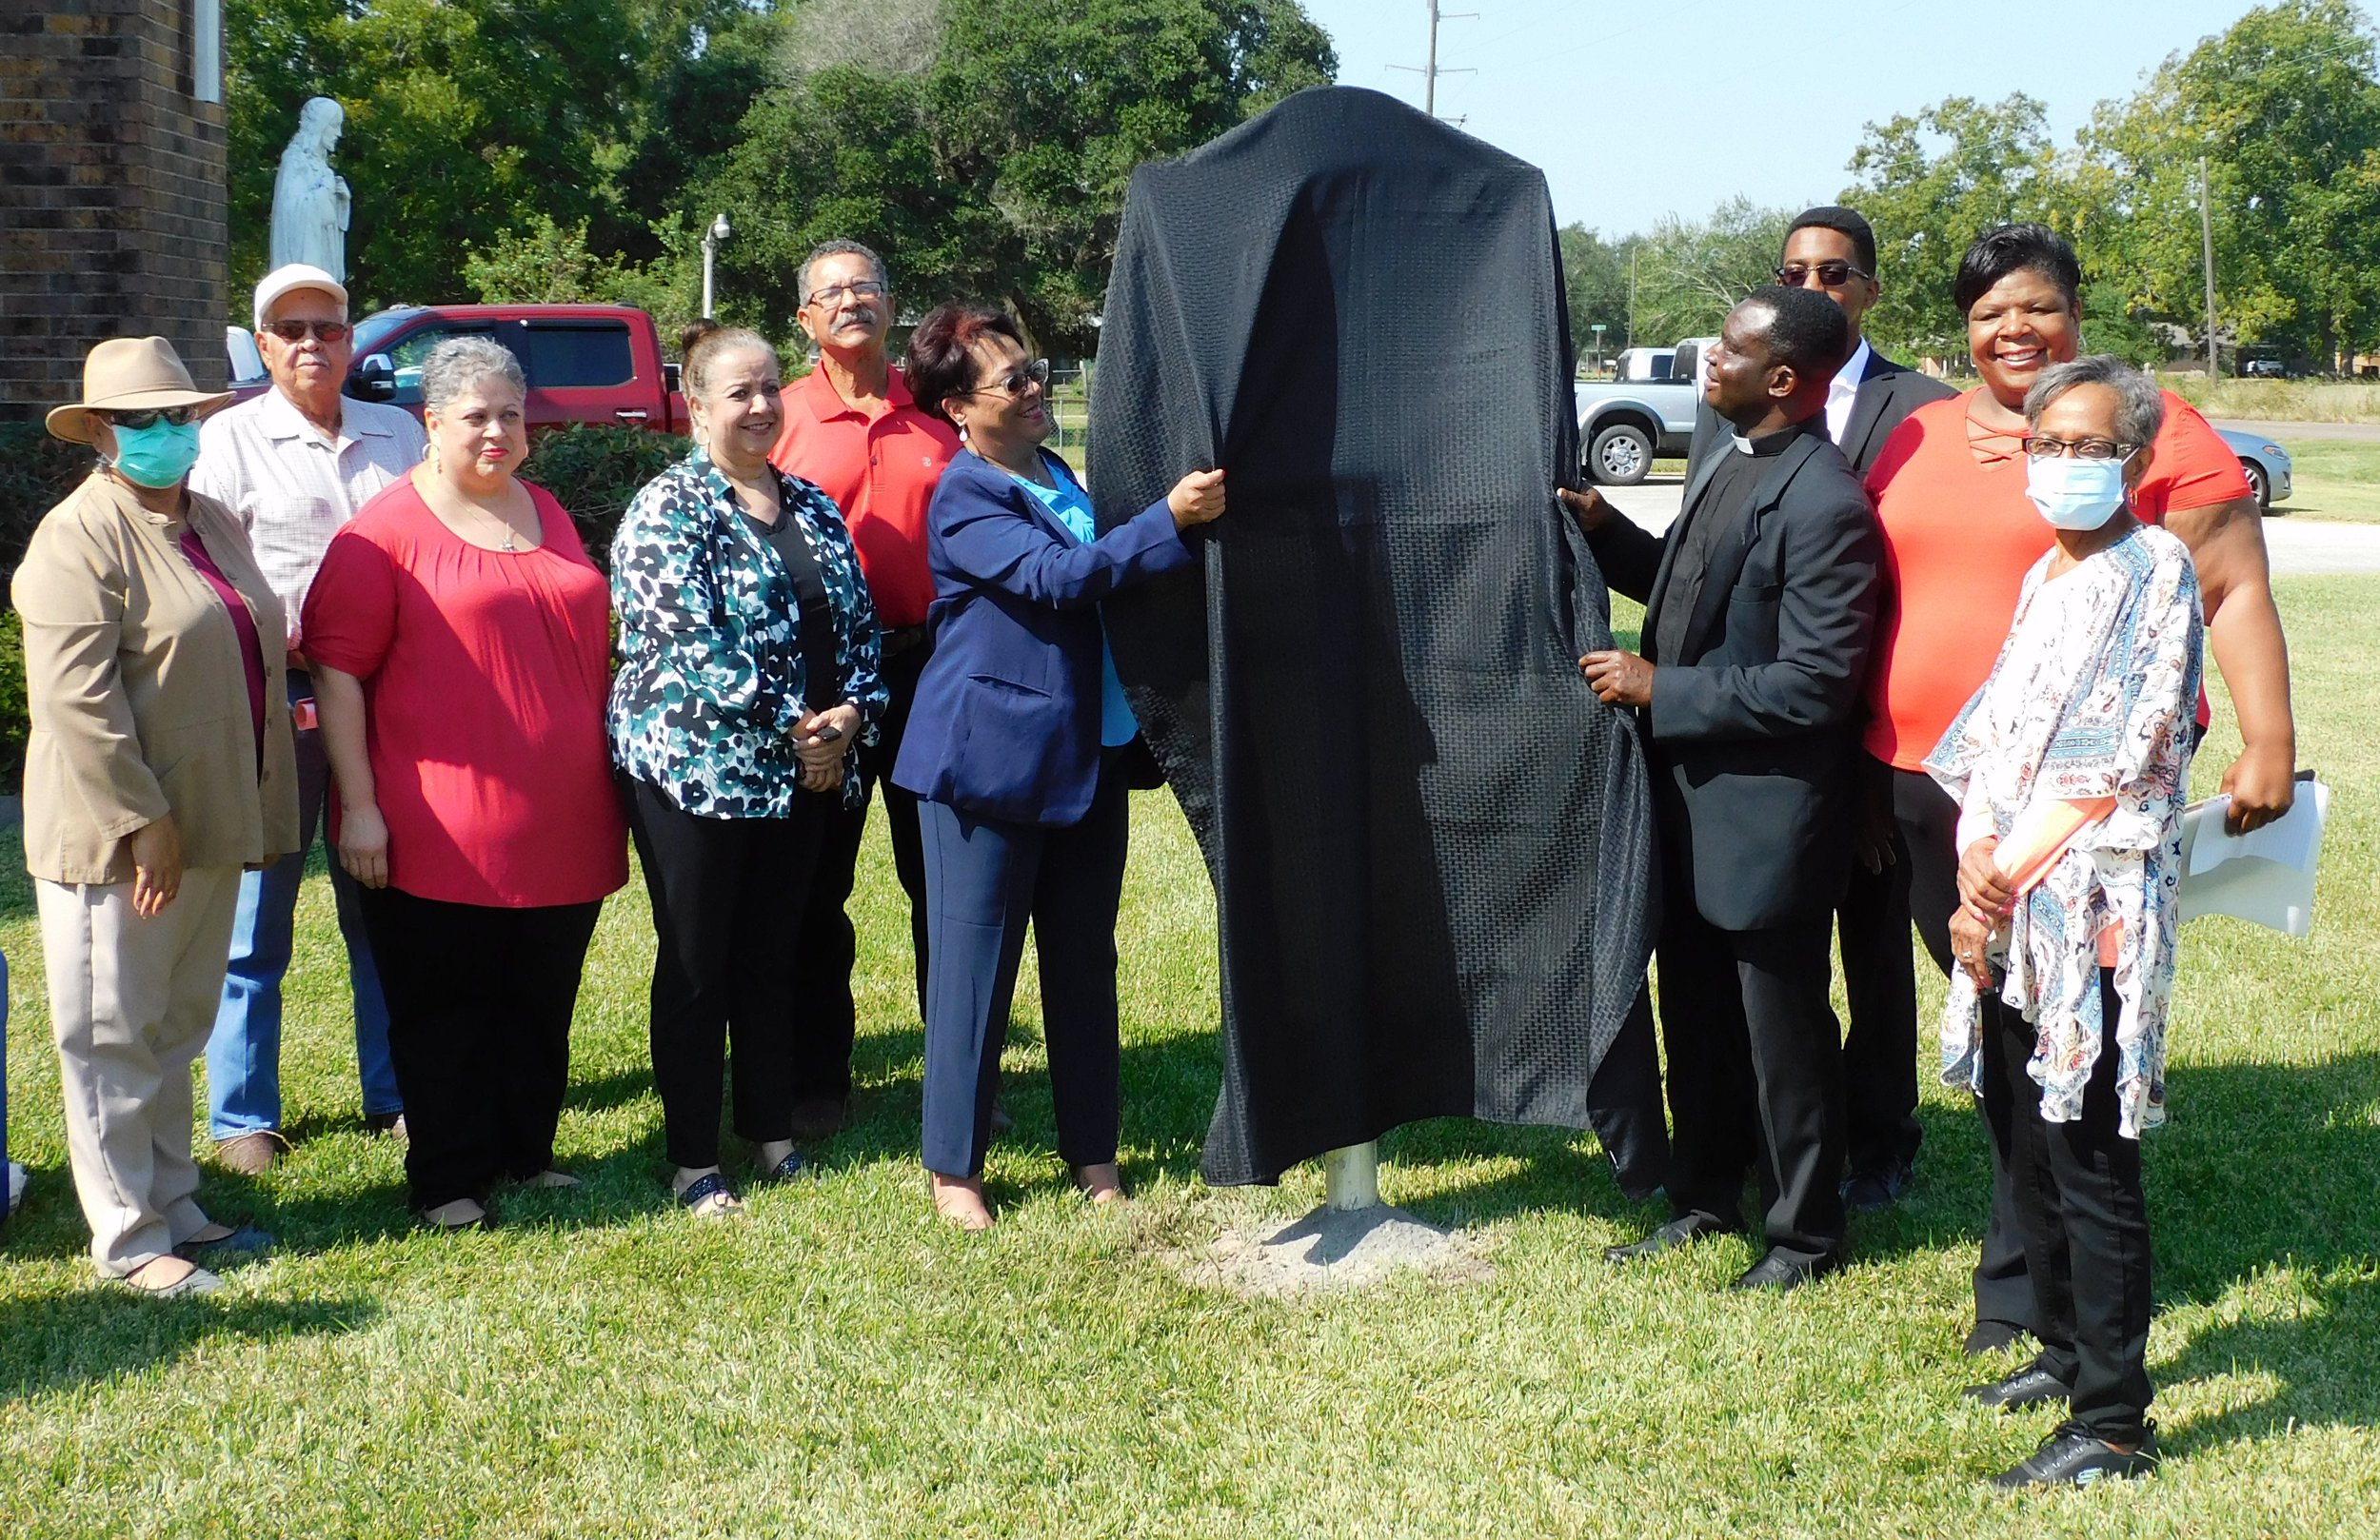  The unveiling with Rev. Mbamu, Elizabeth Harrison, Robynn Miller, Marcie Arceneaux and other parish council members. 